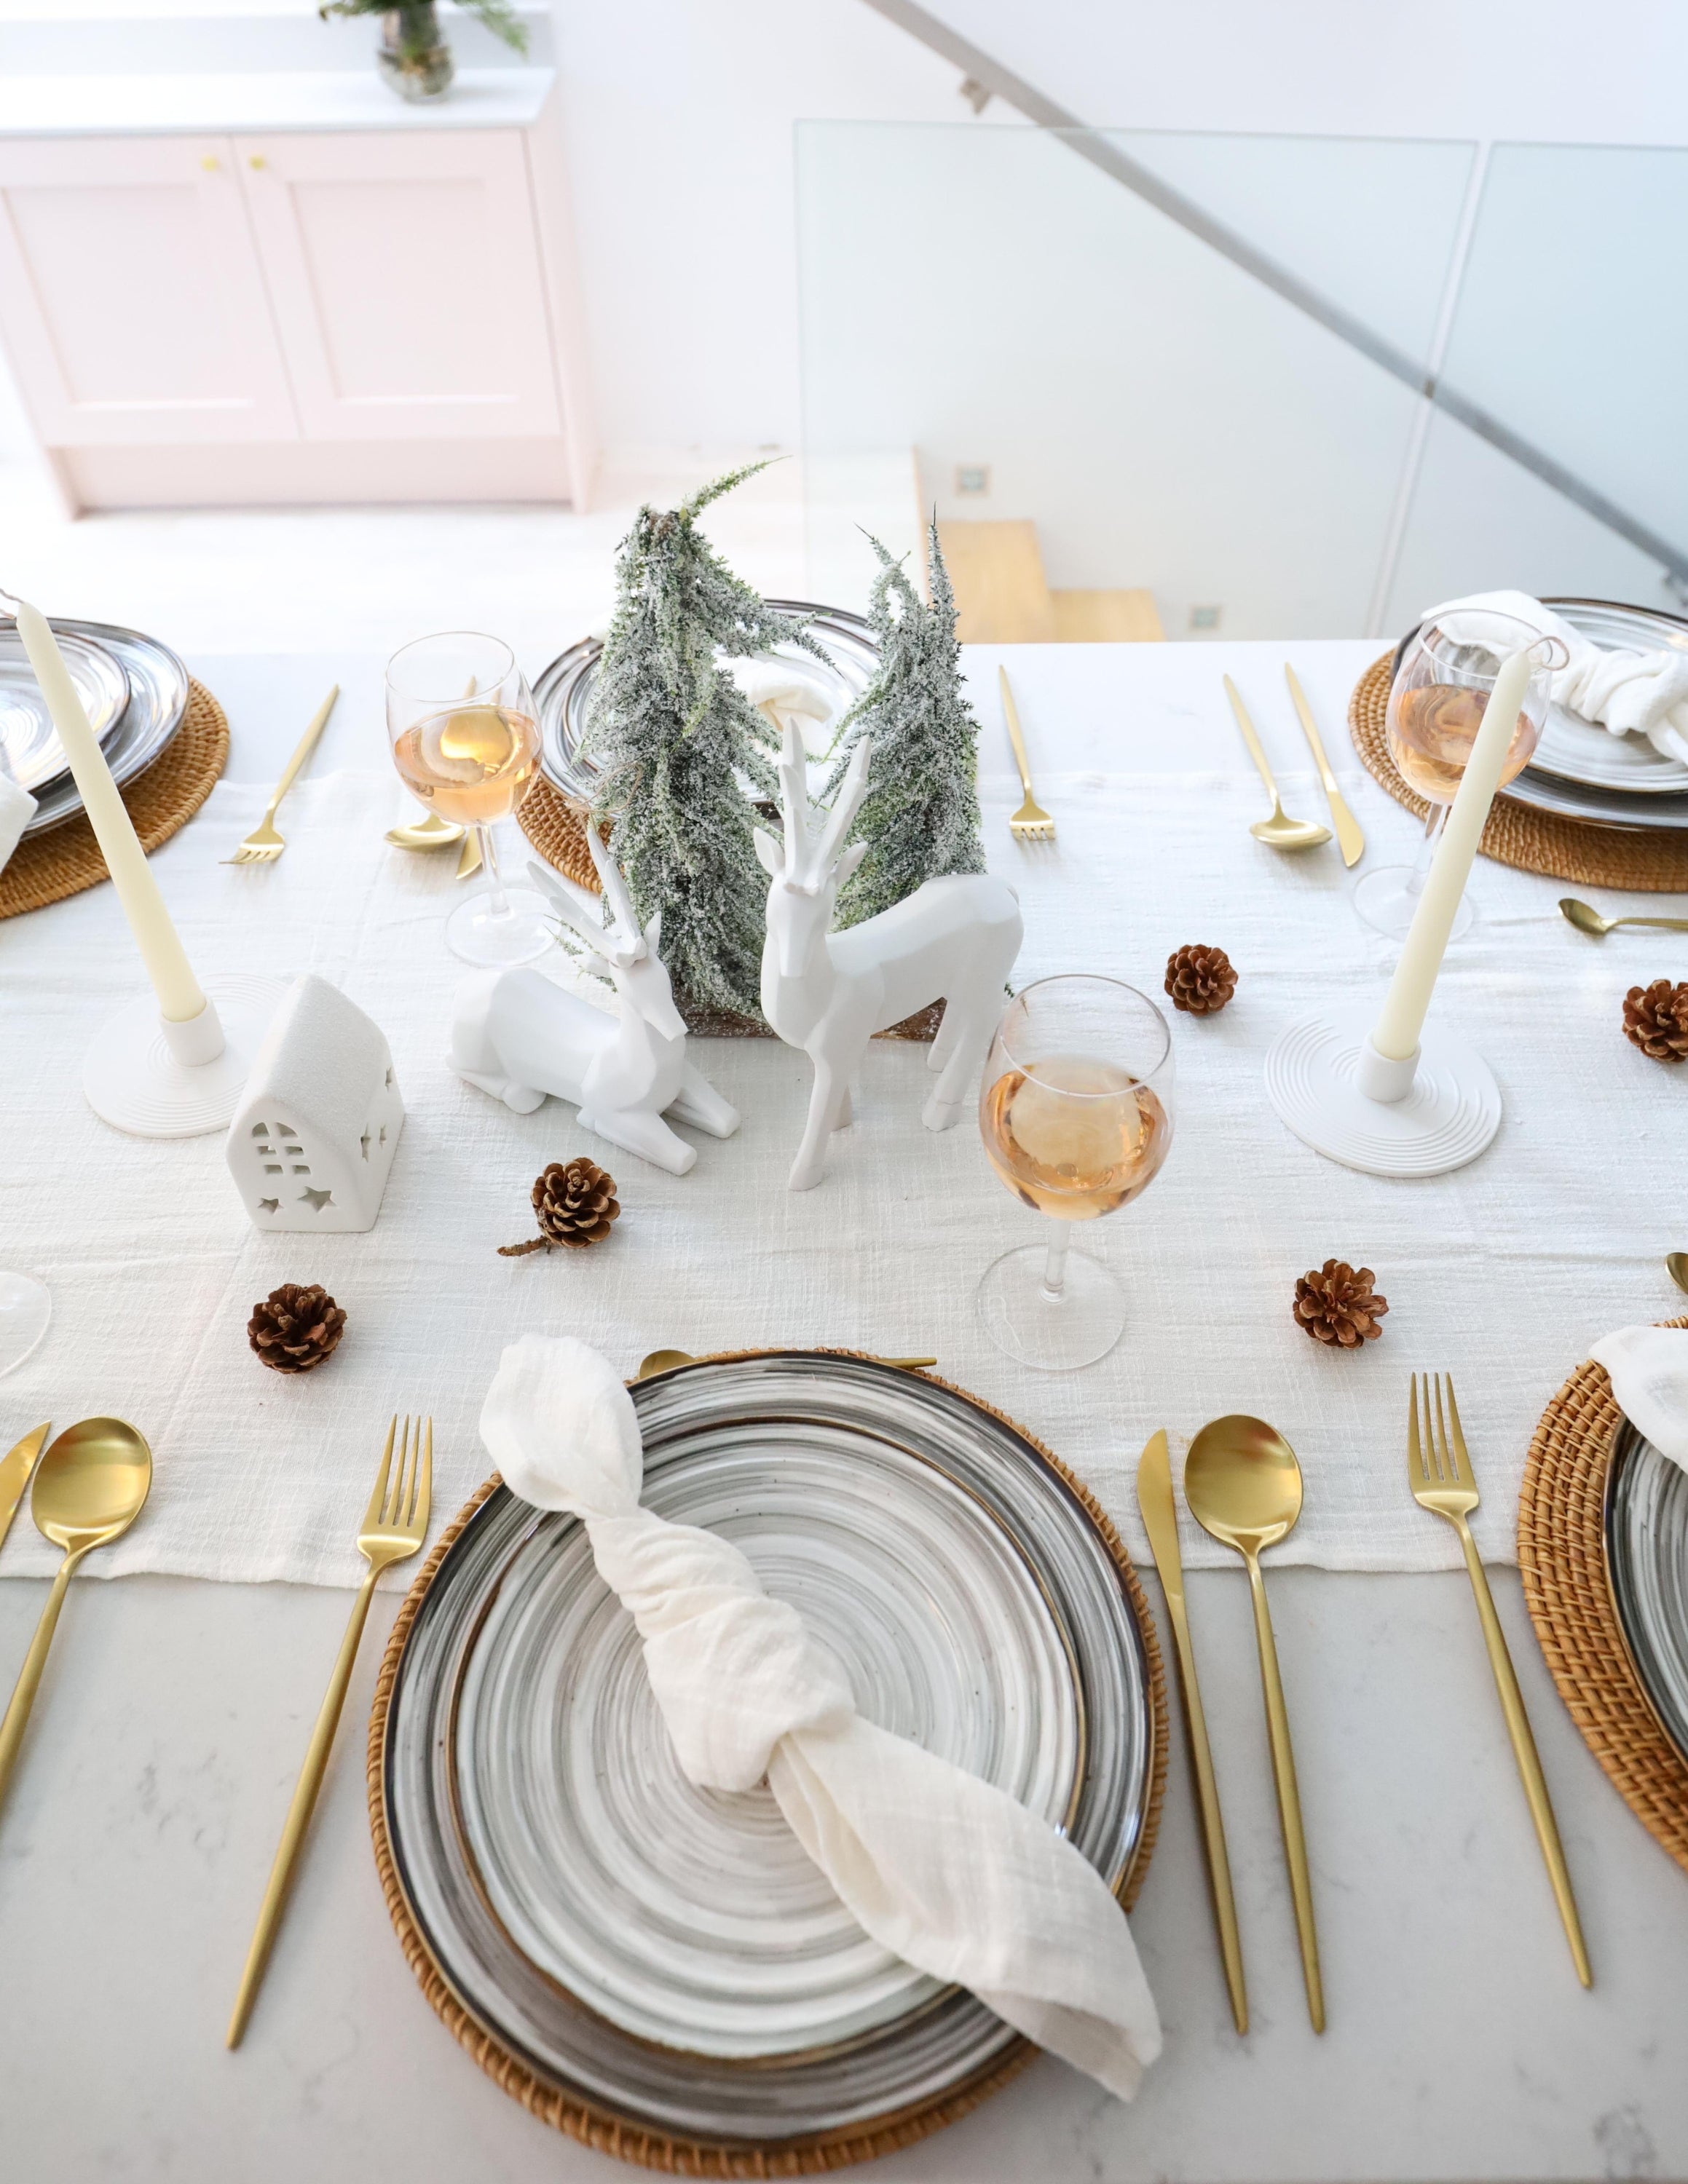 What a Host Home Decor: Christmas Tablescape With Geometric Decorative Christmas Deers, Scandi Houses, Rattan Placemats, Porcelain Plates Set Tableware, Gold Cutlery Stainless Steel Set and Rustic Cotton Gauze Table Textiles